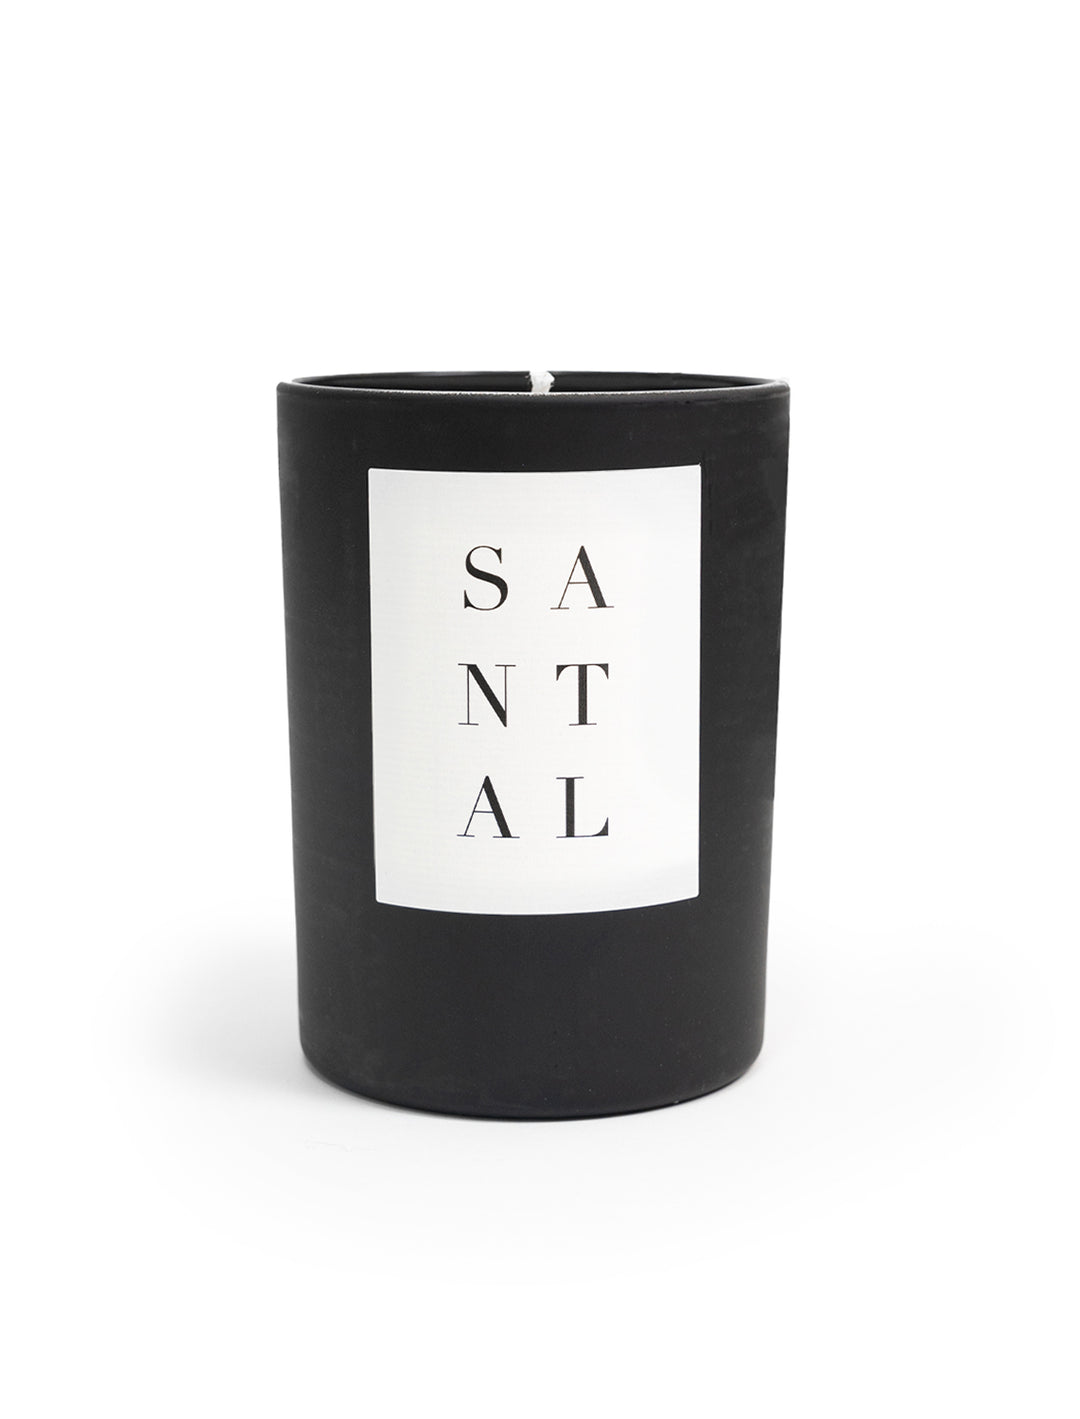 Front view of Brooklyn Candle Studio's NOIR | santal candle.